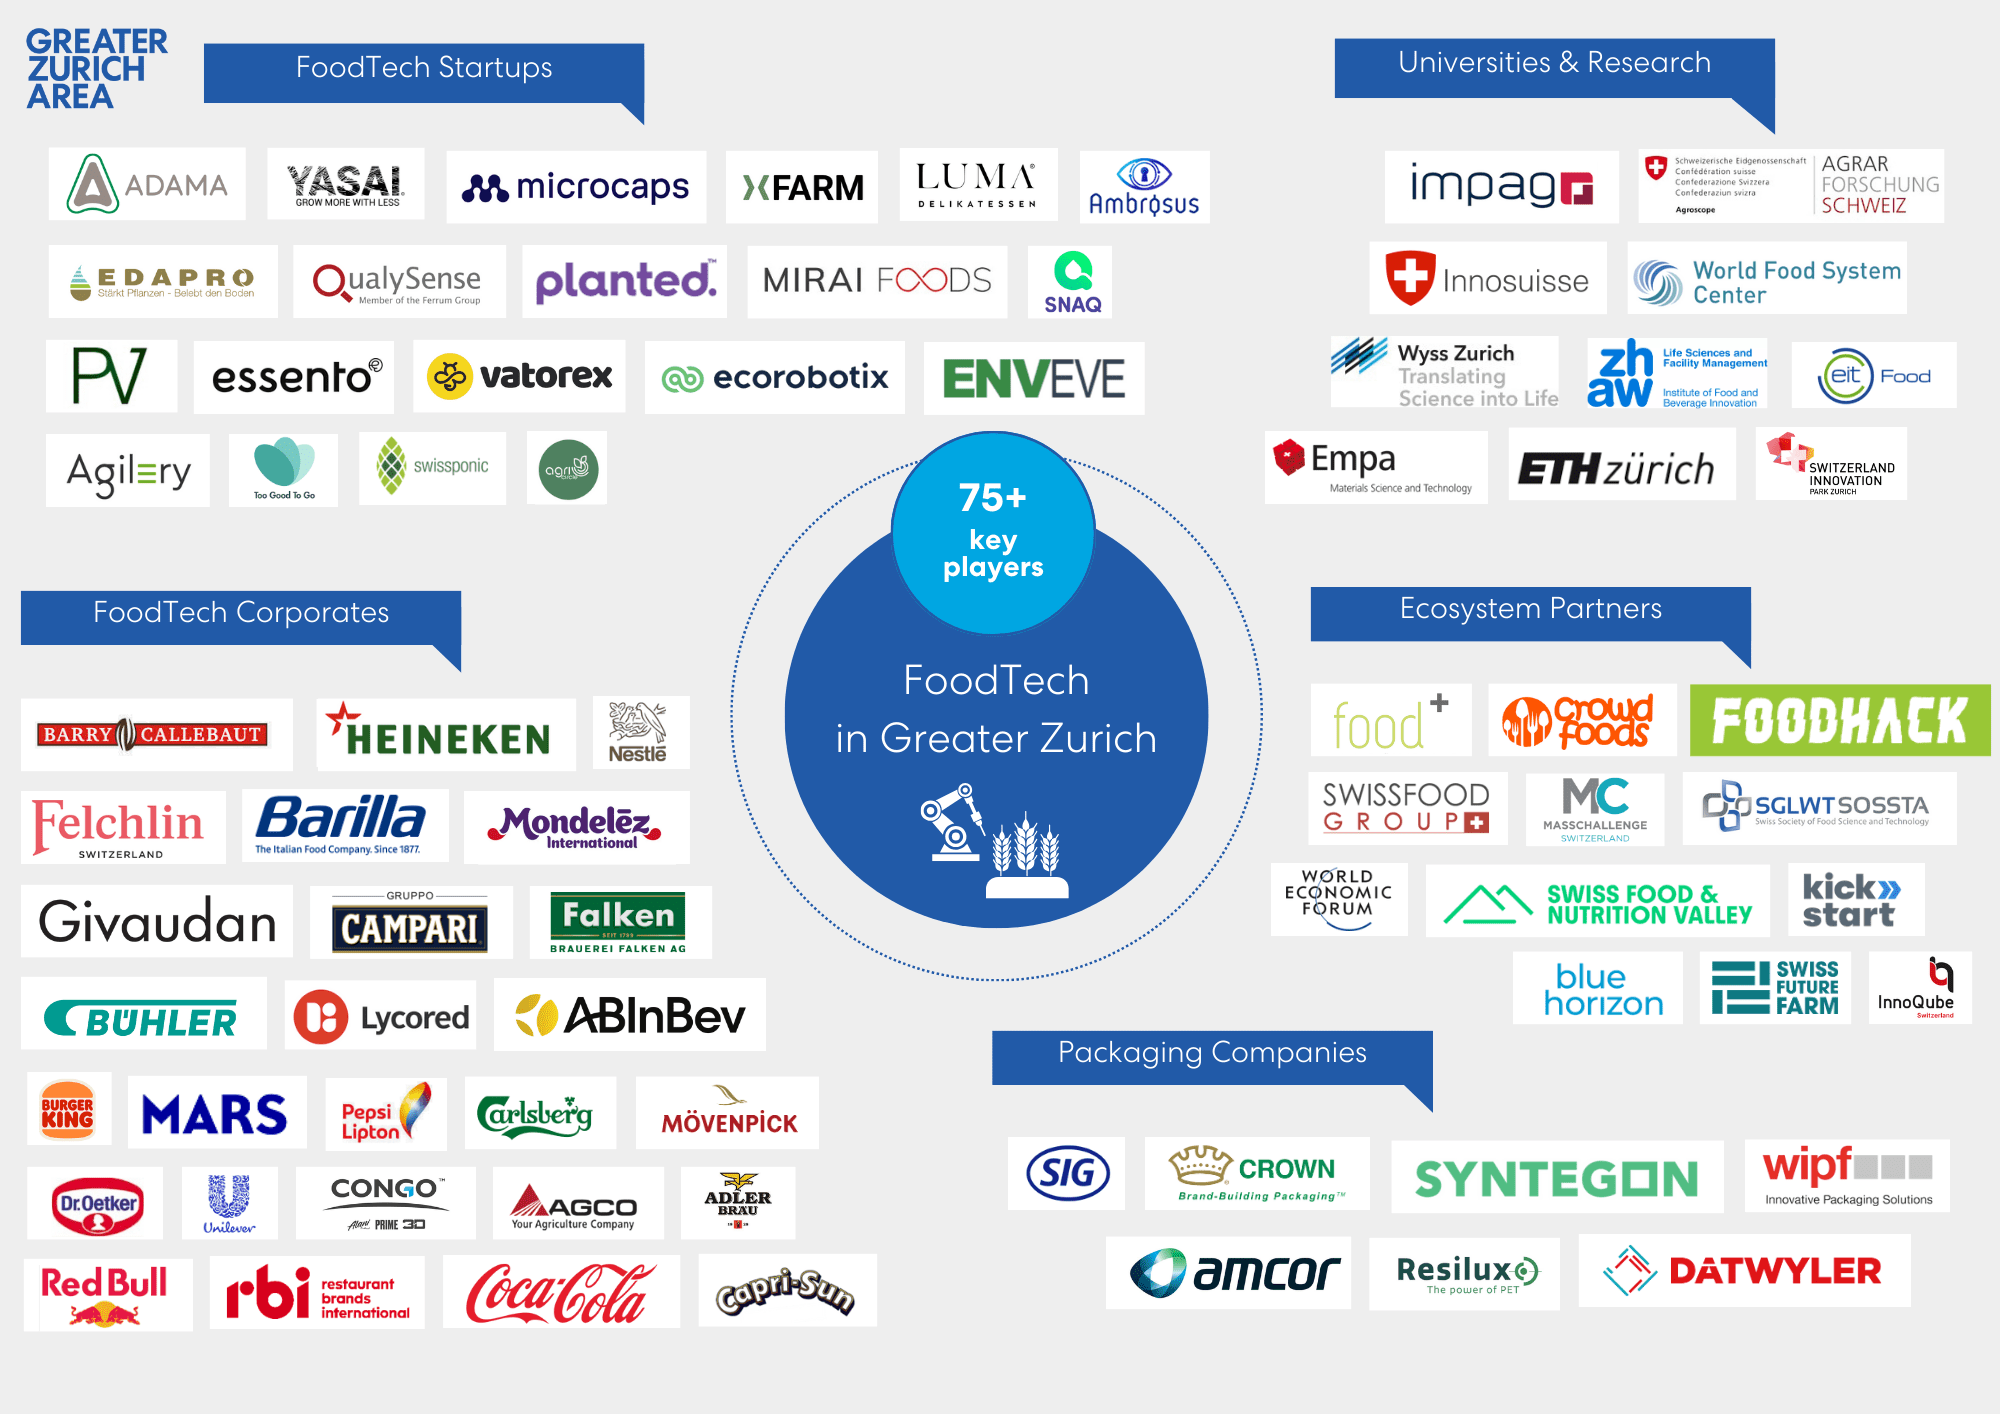 FoodTech in Greater Zurich Area ecosystem map